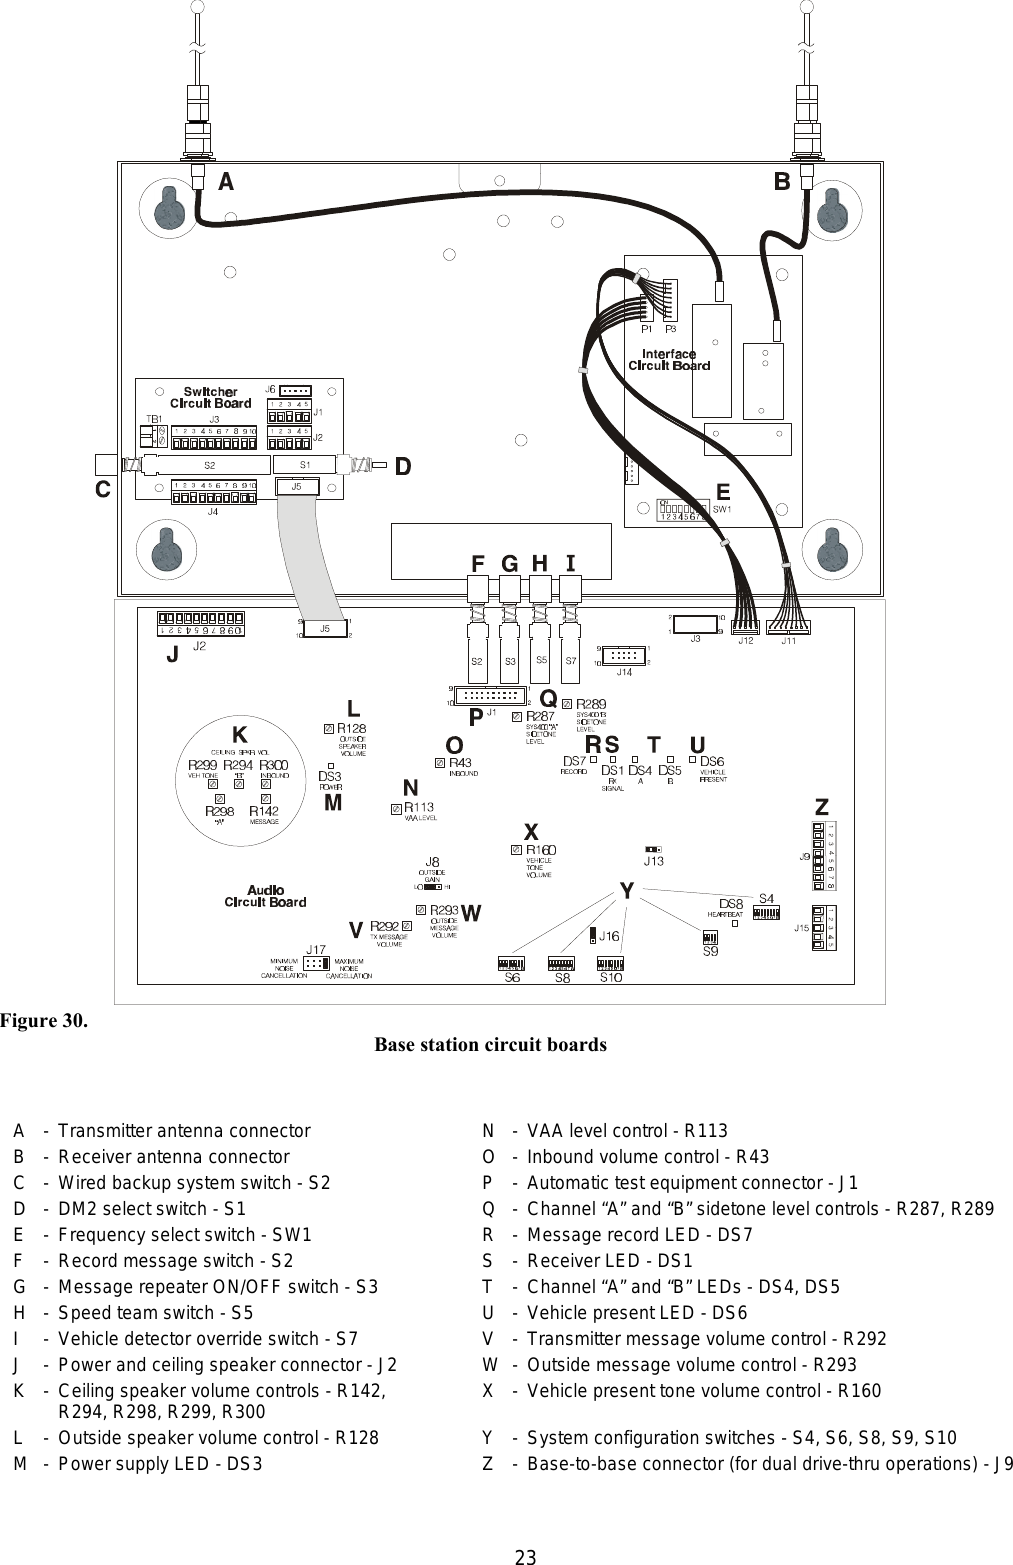 23Figure 30. Base station circuit boardsA-Transmitter antenna connector N-VAA level control - R113B-Receiver antenna connector O-Inbound volume control - R43C-Wired backup system switch - S2 P-Automatic test equipment connector - J1D-DM2 select switch - S1 Q-Channel “A” and “B” sidetone level controls - R287, R289E-Frequency select switch - SW1 R-Message record LED - DS7F-Record message switch - S2 S-Receiver LED - DS1G-Message repeater ON/OFF switch - S3 T-Channel “A” and “B” LEDs - DS4, DS5H-Speed team switch - S5 U-Vehicle present LED - DS6I-Vehicle detector override switch - S7 V-Transmitter message volume control - R292J-Power and ceiling speaker connector - J2 W-Outside message volume control - R293K-Ceiling speaker volume controls - R142,  X-Vehicle present tone volume control - R160R294, R298, R299, R300L-Outside speaker volume control - R128 Y-System configuration switches - S4, S6, S8, S9, S10M - Power supply LED - DS3 Z-Base-to-base connector (for dual drive-thru operations) - J9